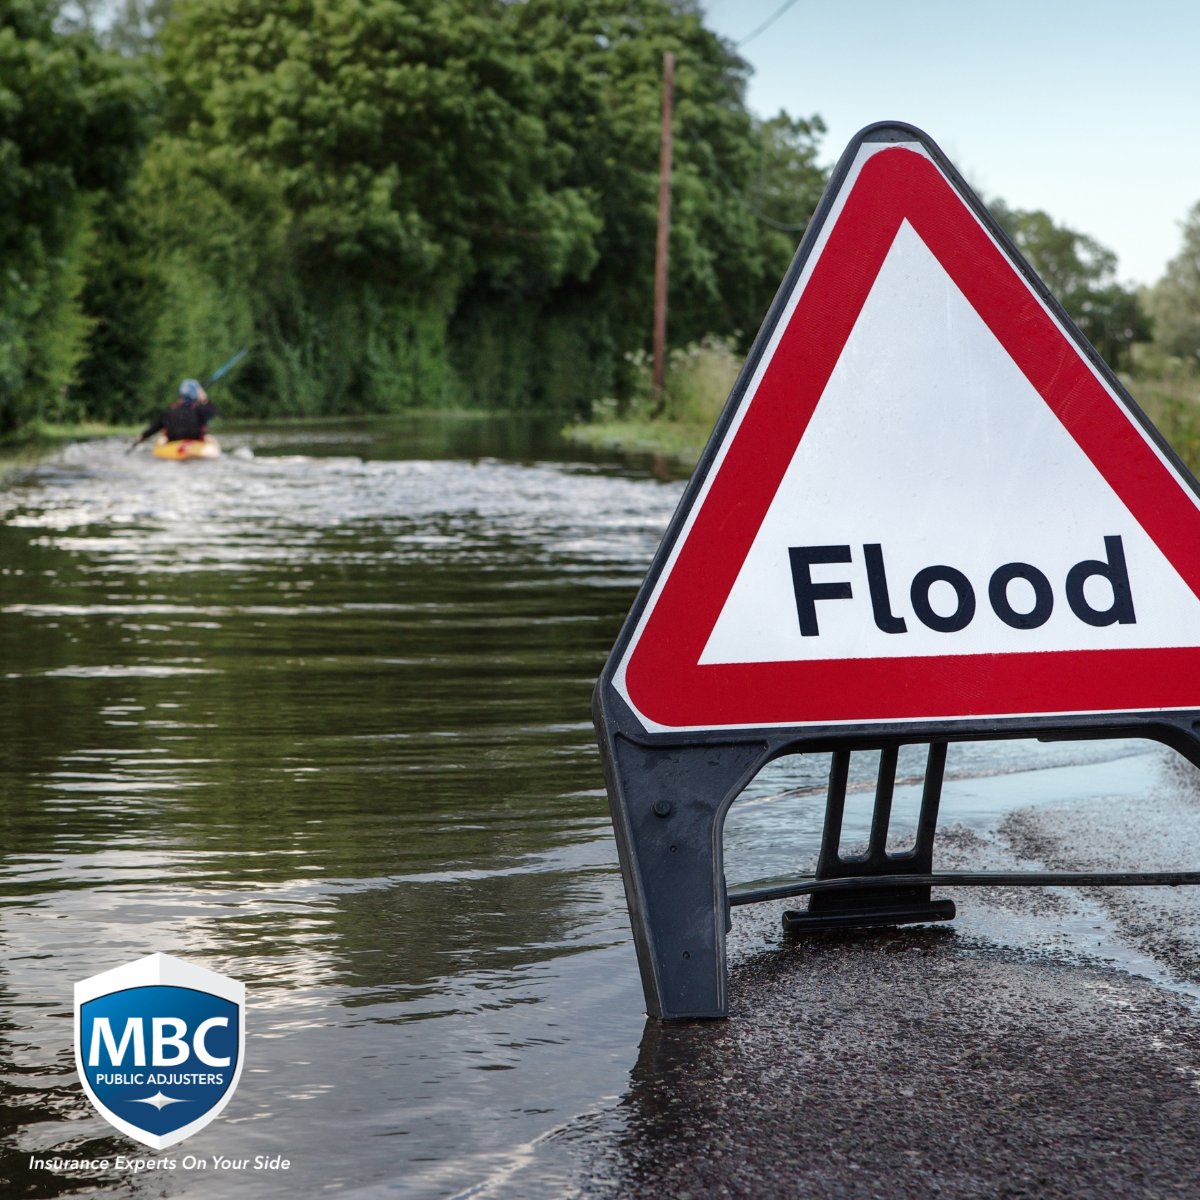 🚨 Stay Safe: 

Evacuate quickly, avoid electrical devices and contaminated floodwaters, and secure crucial documents in waterproof storage.

#FloodPreparedness #EmergencyResponse #PublicAdjuster #FloodSafety